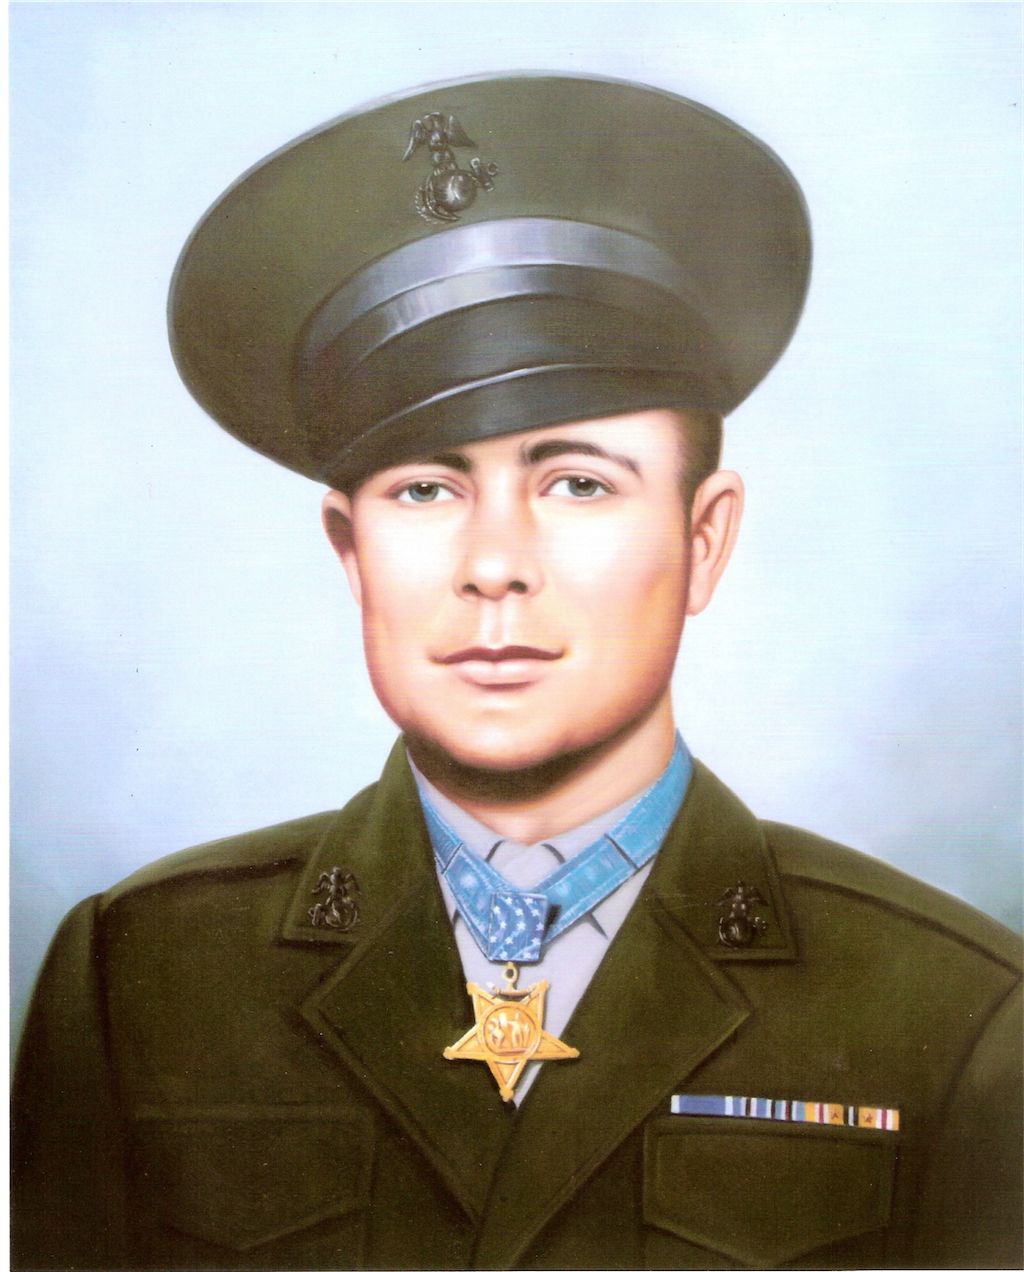 Hershel Williams with Medal of Honor around neck.  Official Marines photo.